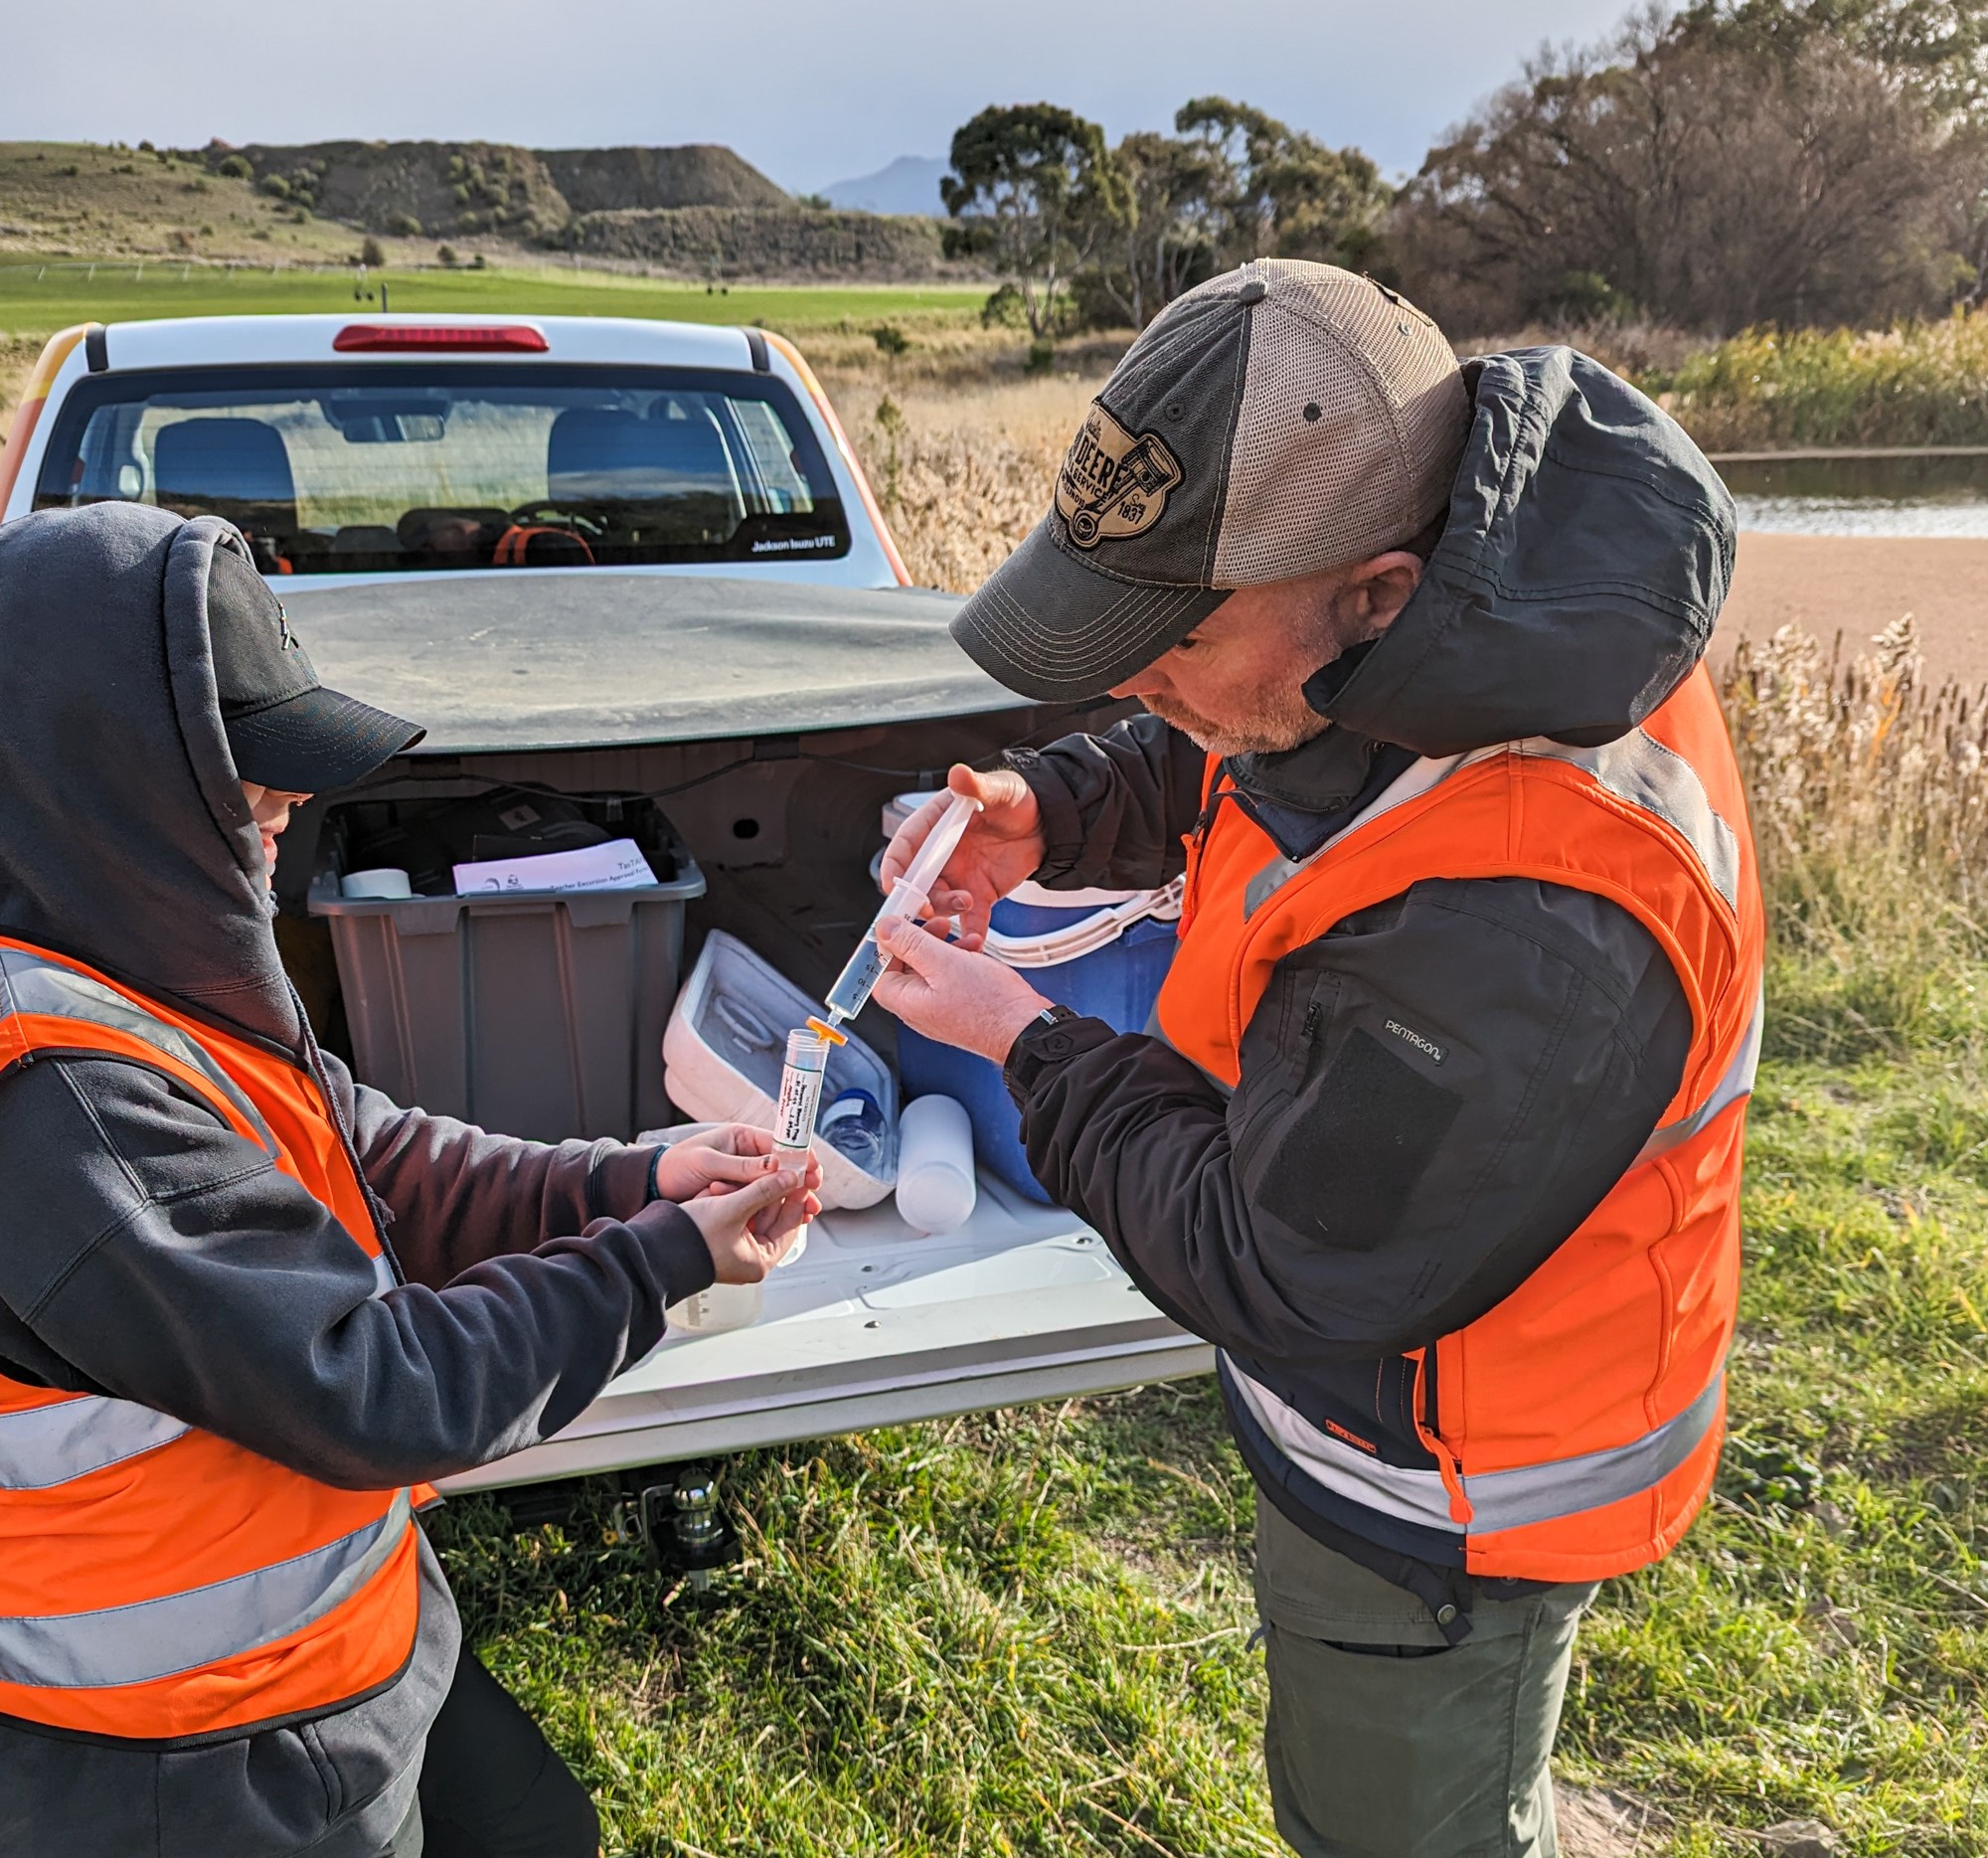 Two people wearing Hi Visibility clothing using a water syringe in front of a ute at an estuary